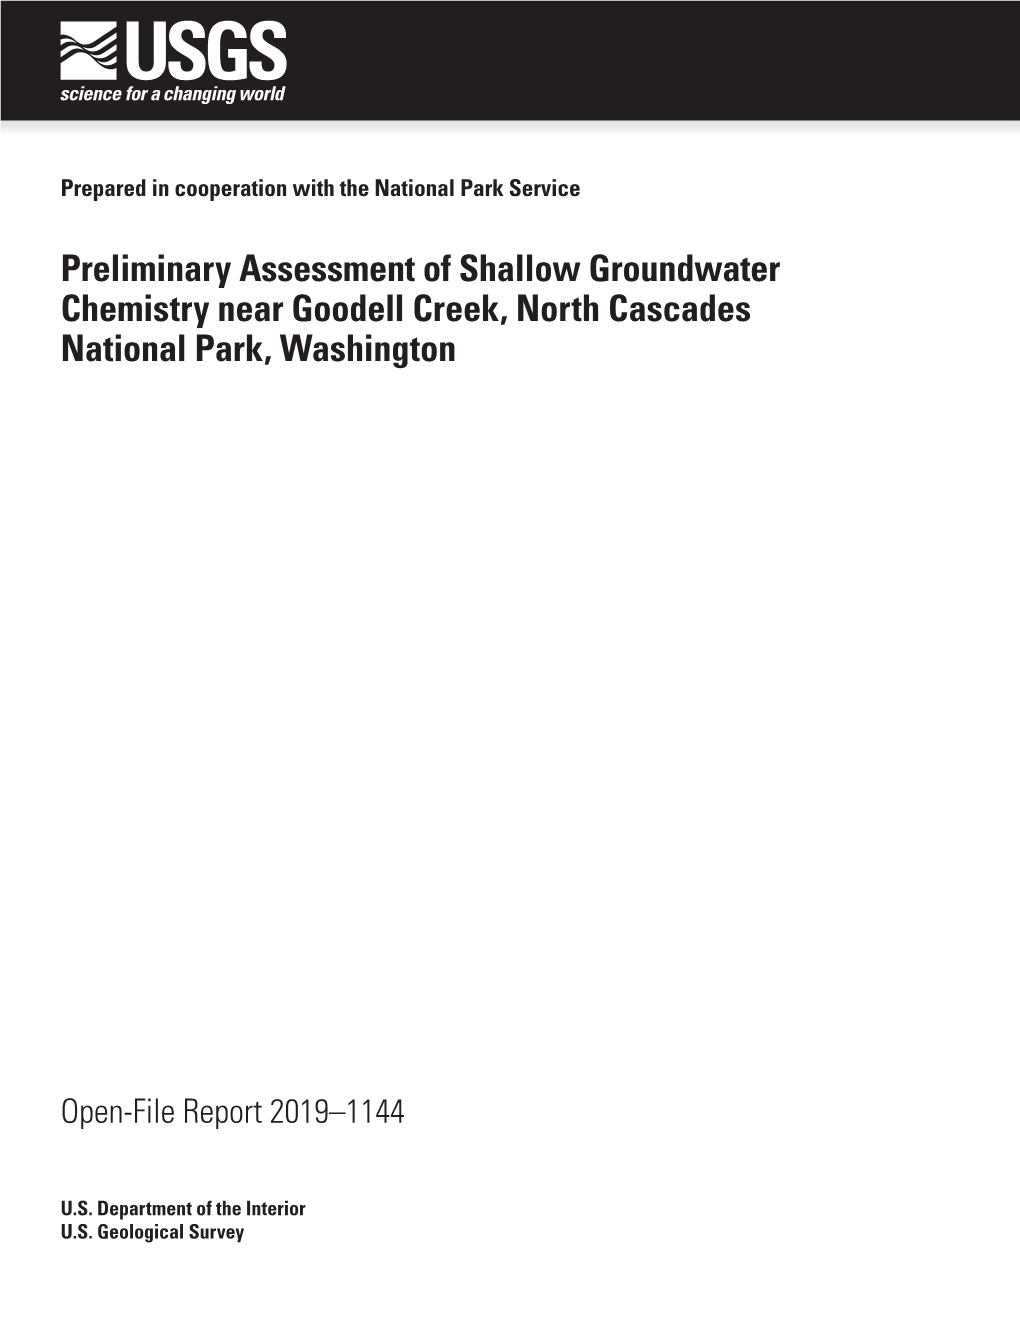 OFR 2019–1144: Preliminary Assessment of Shallow Groundwater Chemistry Near Goodell Creek, North Cascades National Park, Washi